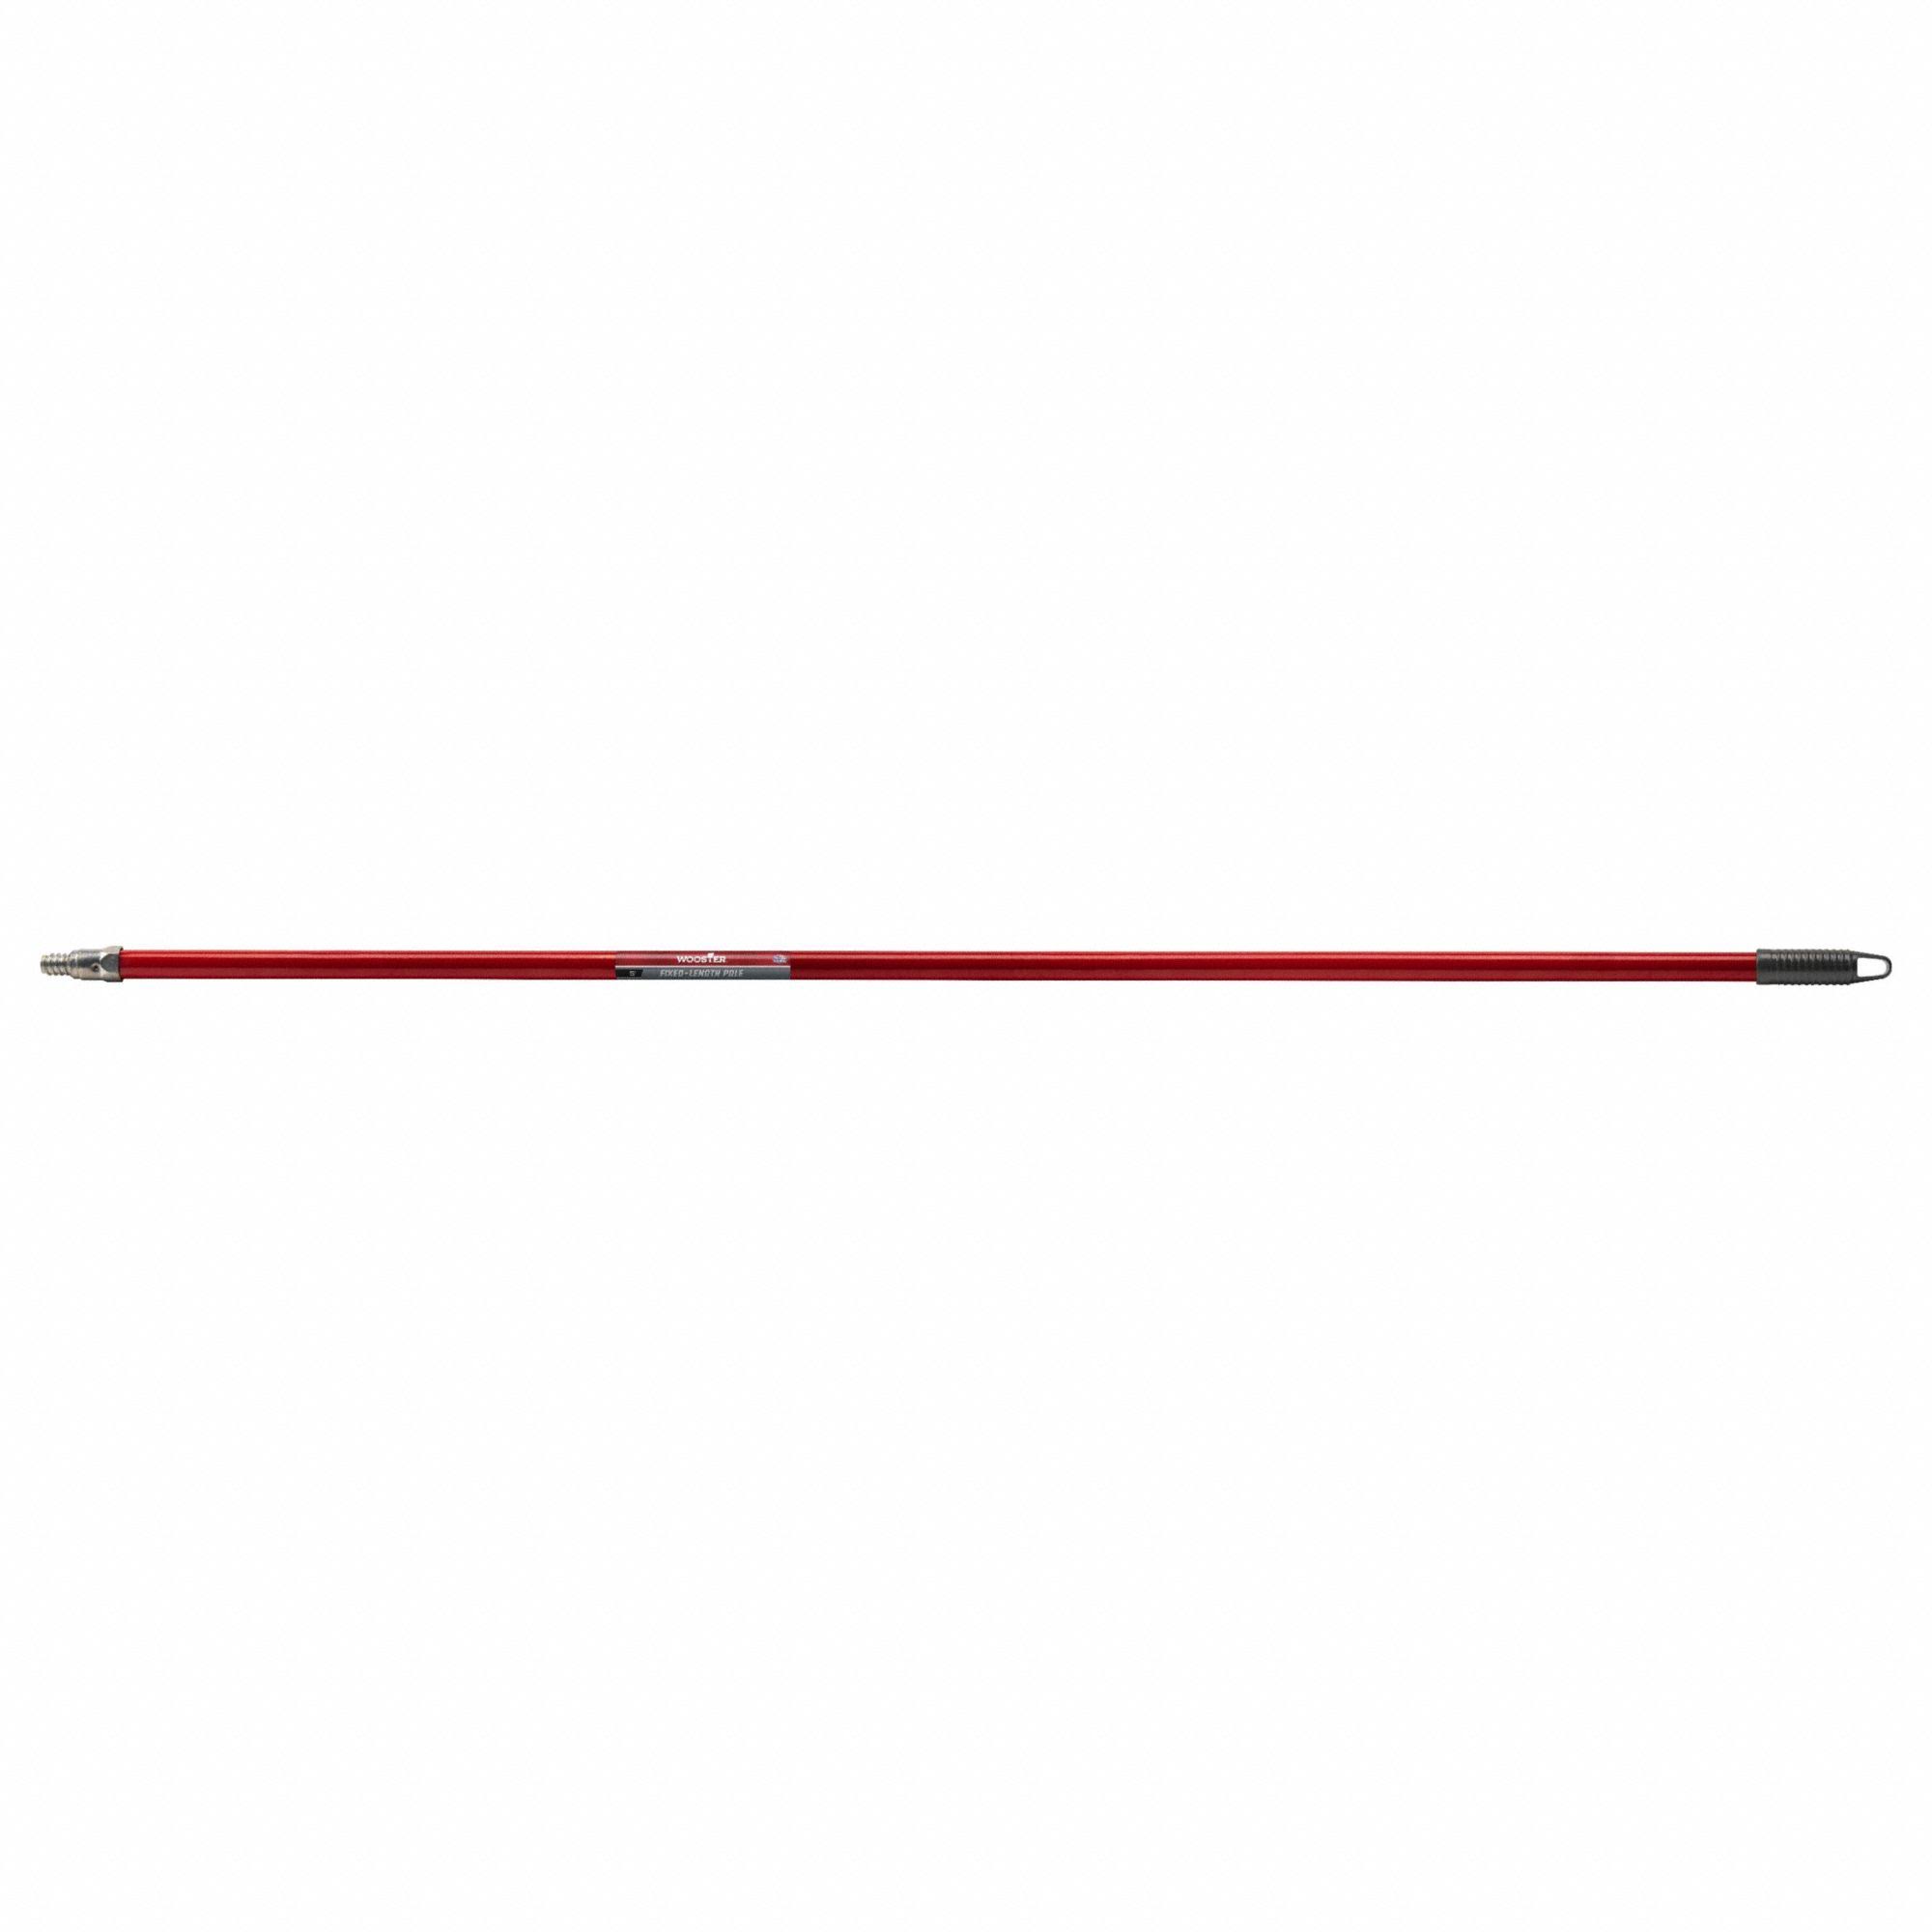 Wooster R070-60 5' Fixed-Length Pole